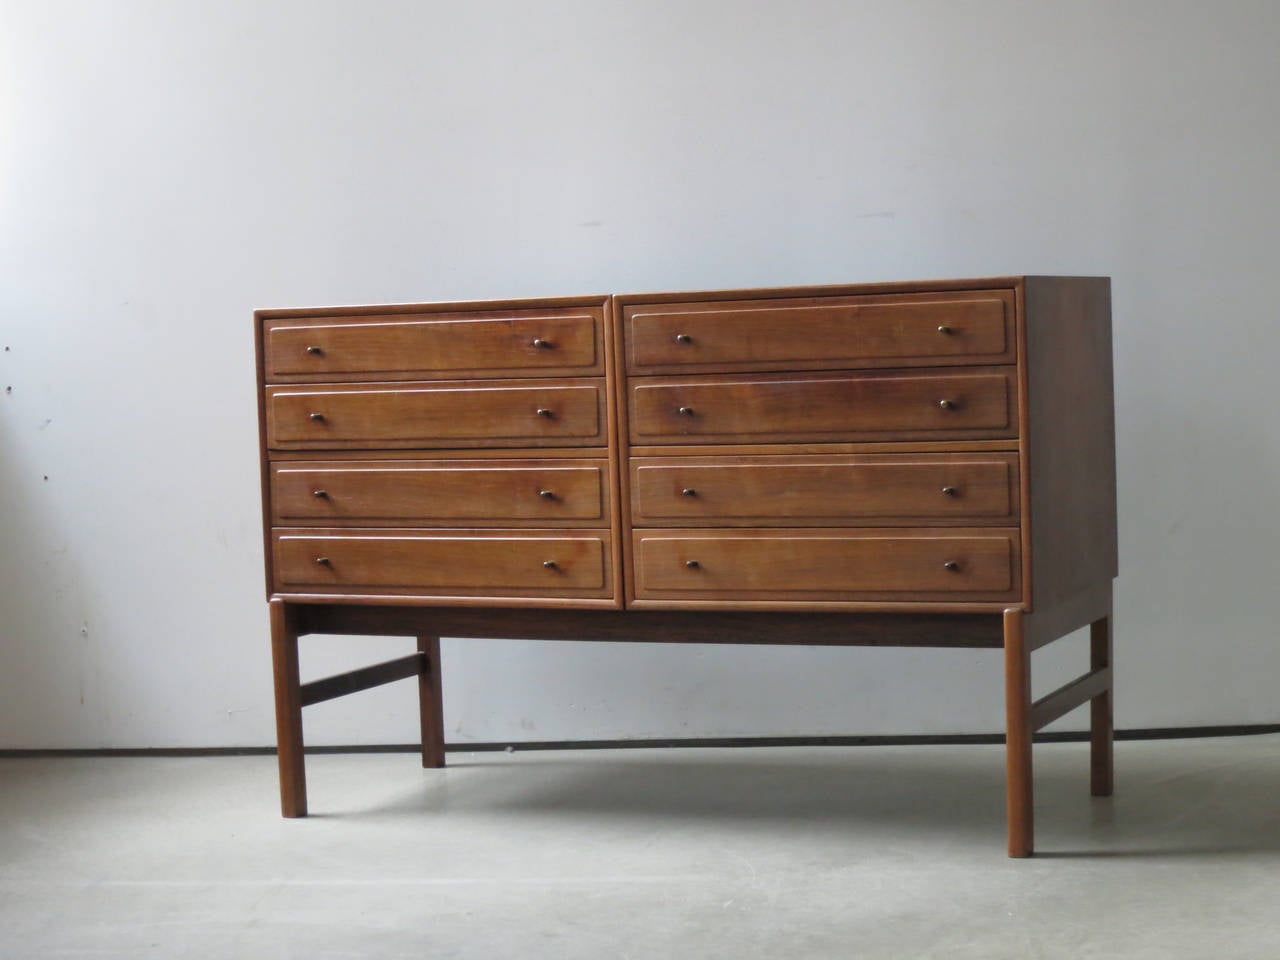 Beautifully Proportioned Rosewood Cabinet in Two Sections by Ole Wanscher. “Addition Cabinet” in two sections, each with four drawers, mounted on a loose frame.

Cabinetmaker A.J. Iversen.

Designed 1959.

Literature:
Ole Wanscher, 